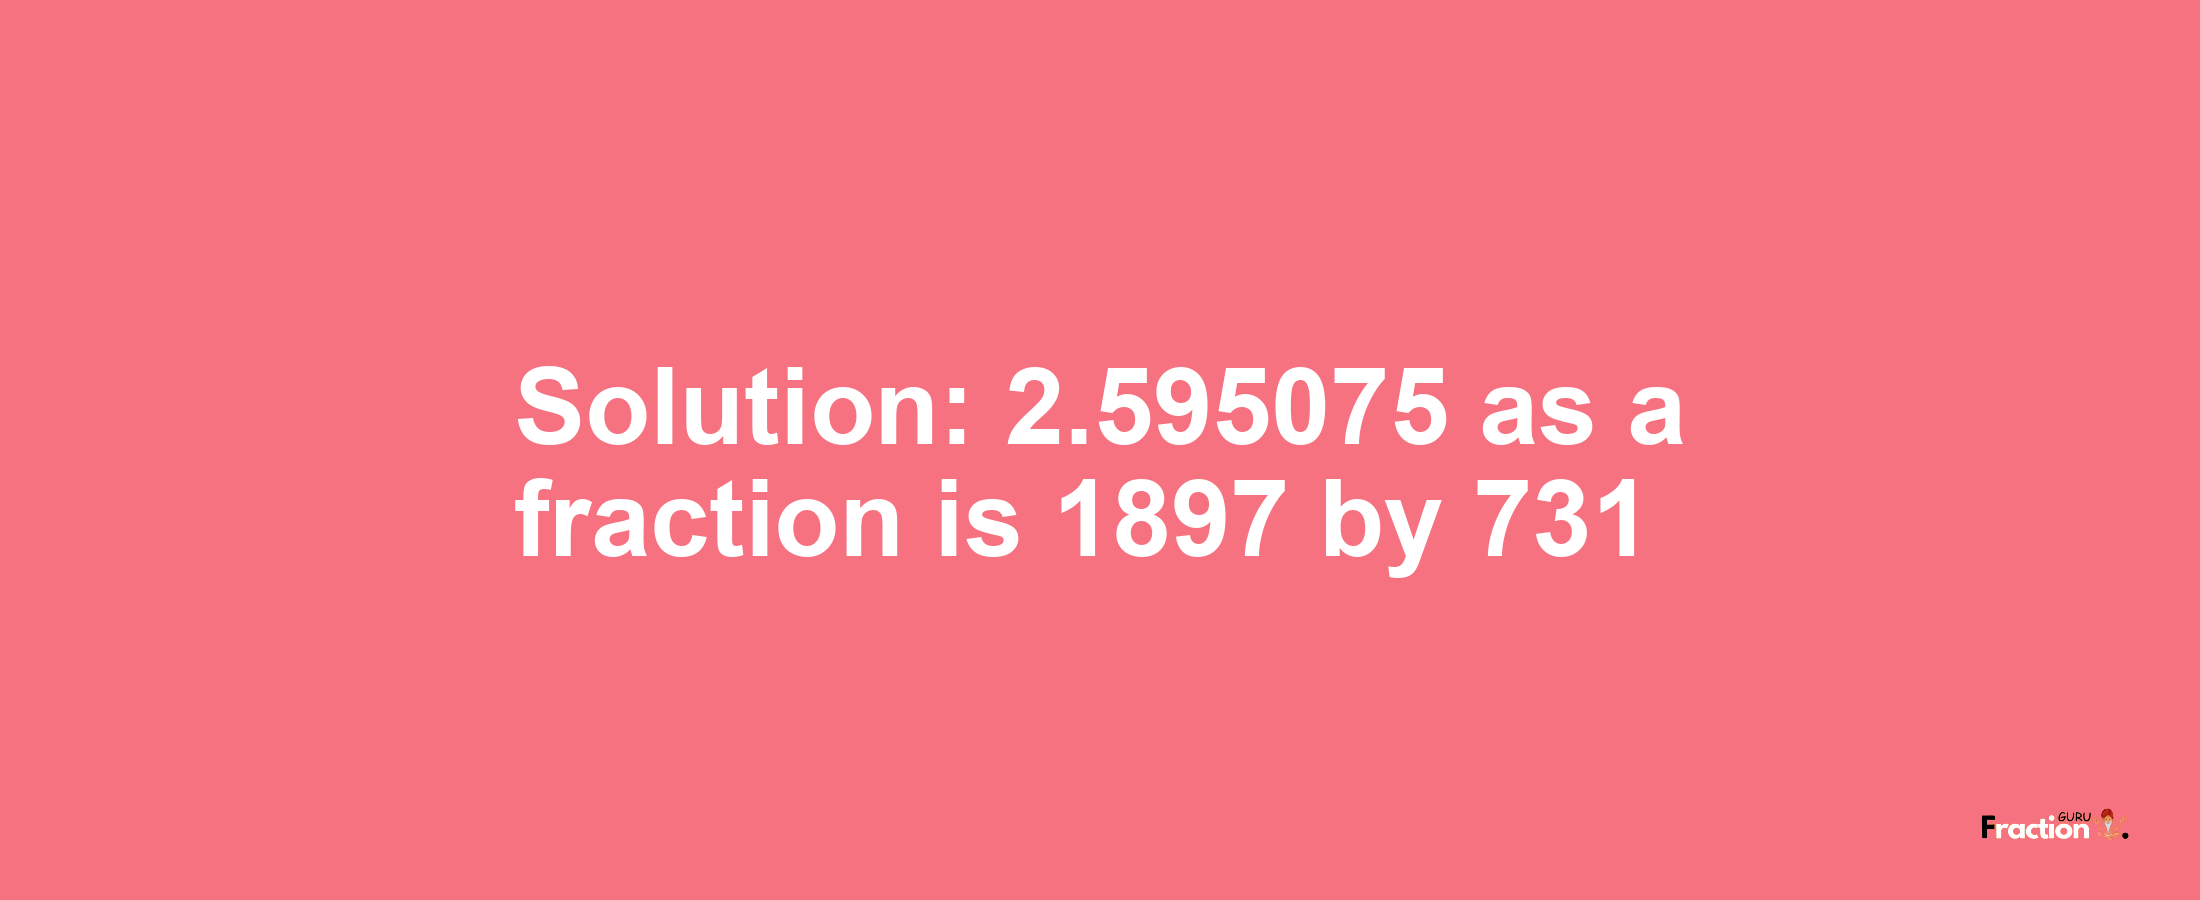 Solution:2.595075 as a fraction is 1897/731